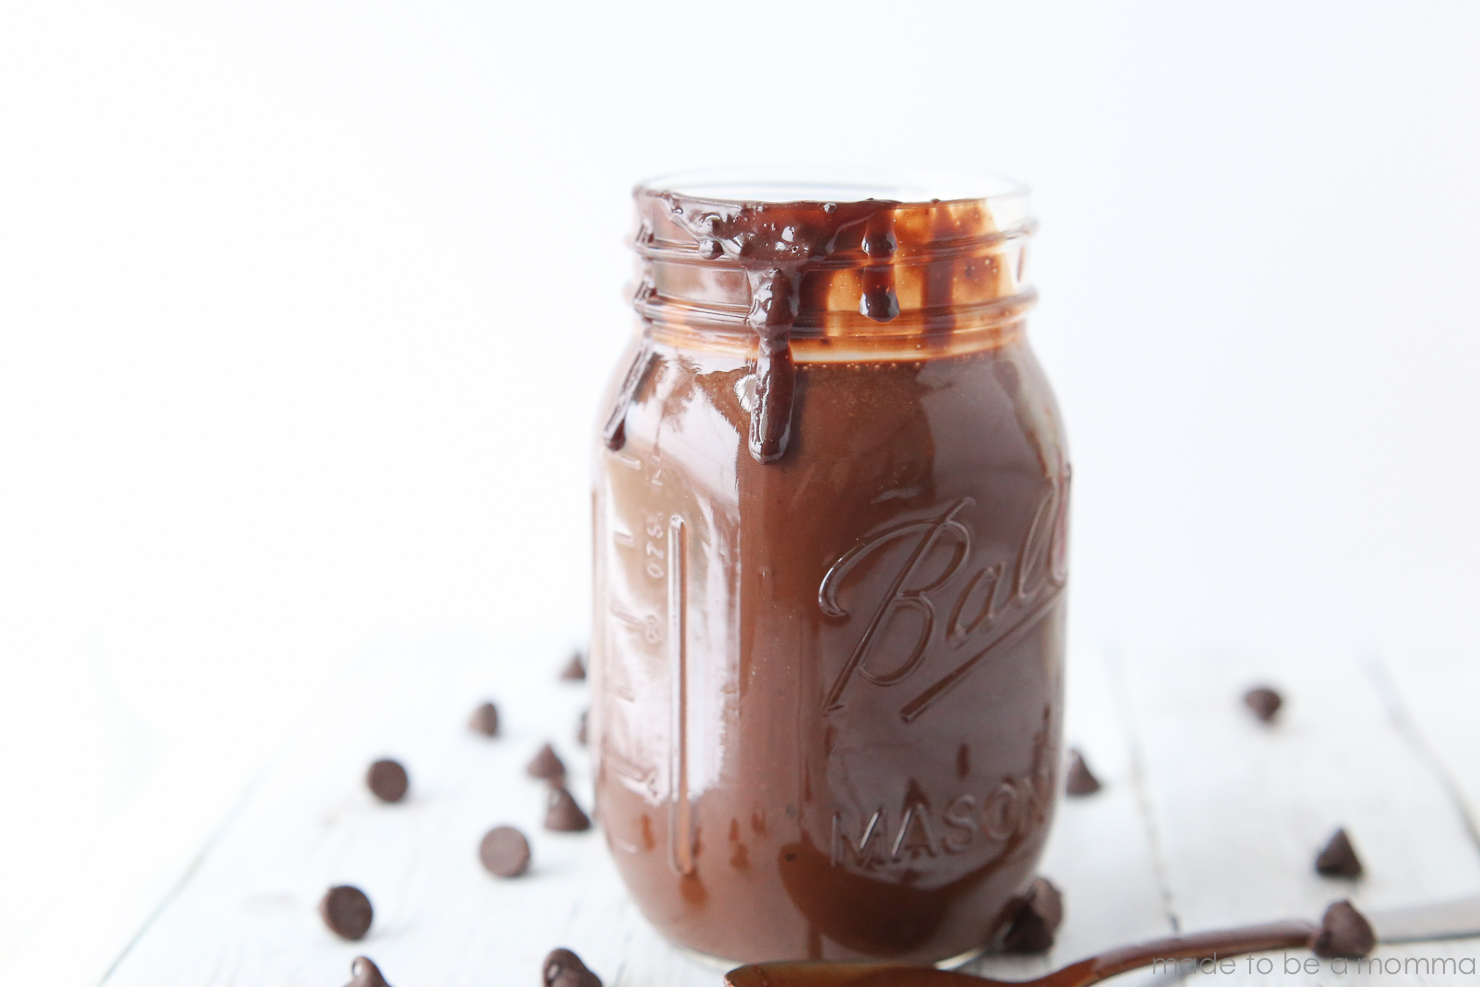 Homemade Chocolate Syrup: simple and delicious chocolate sauce that is great in milk or as a topping on desserts